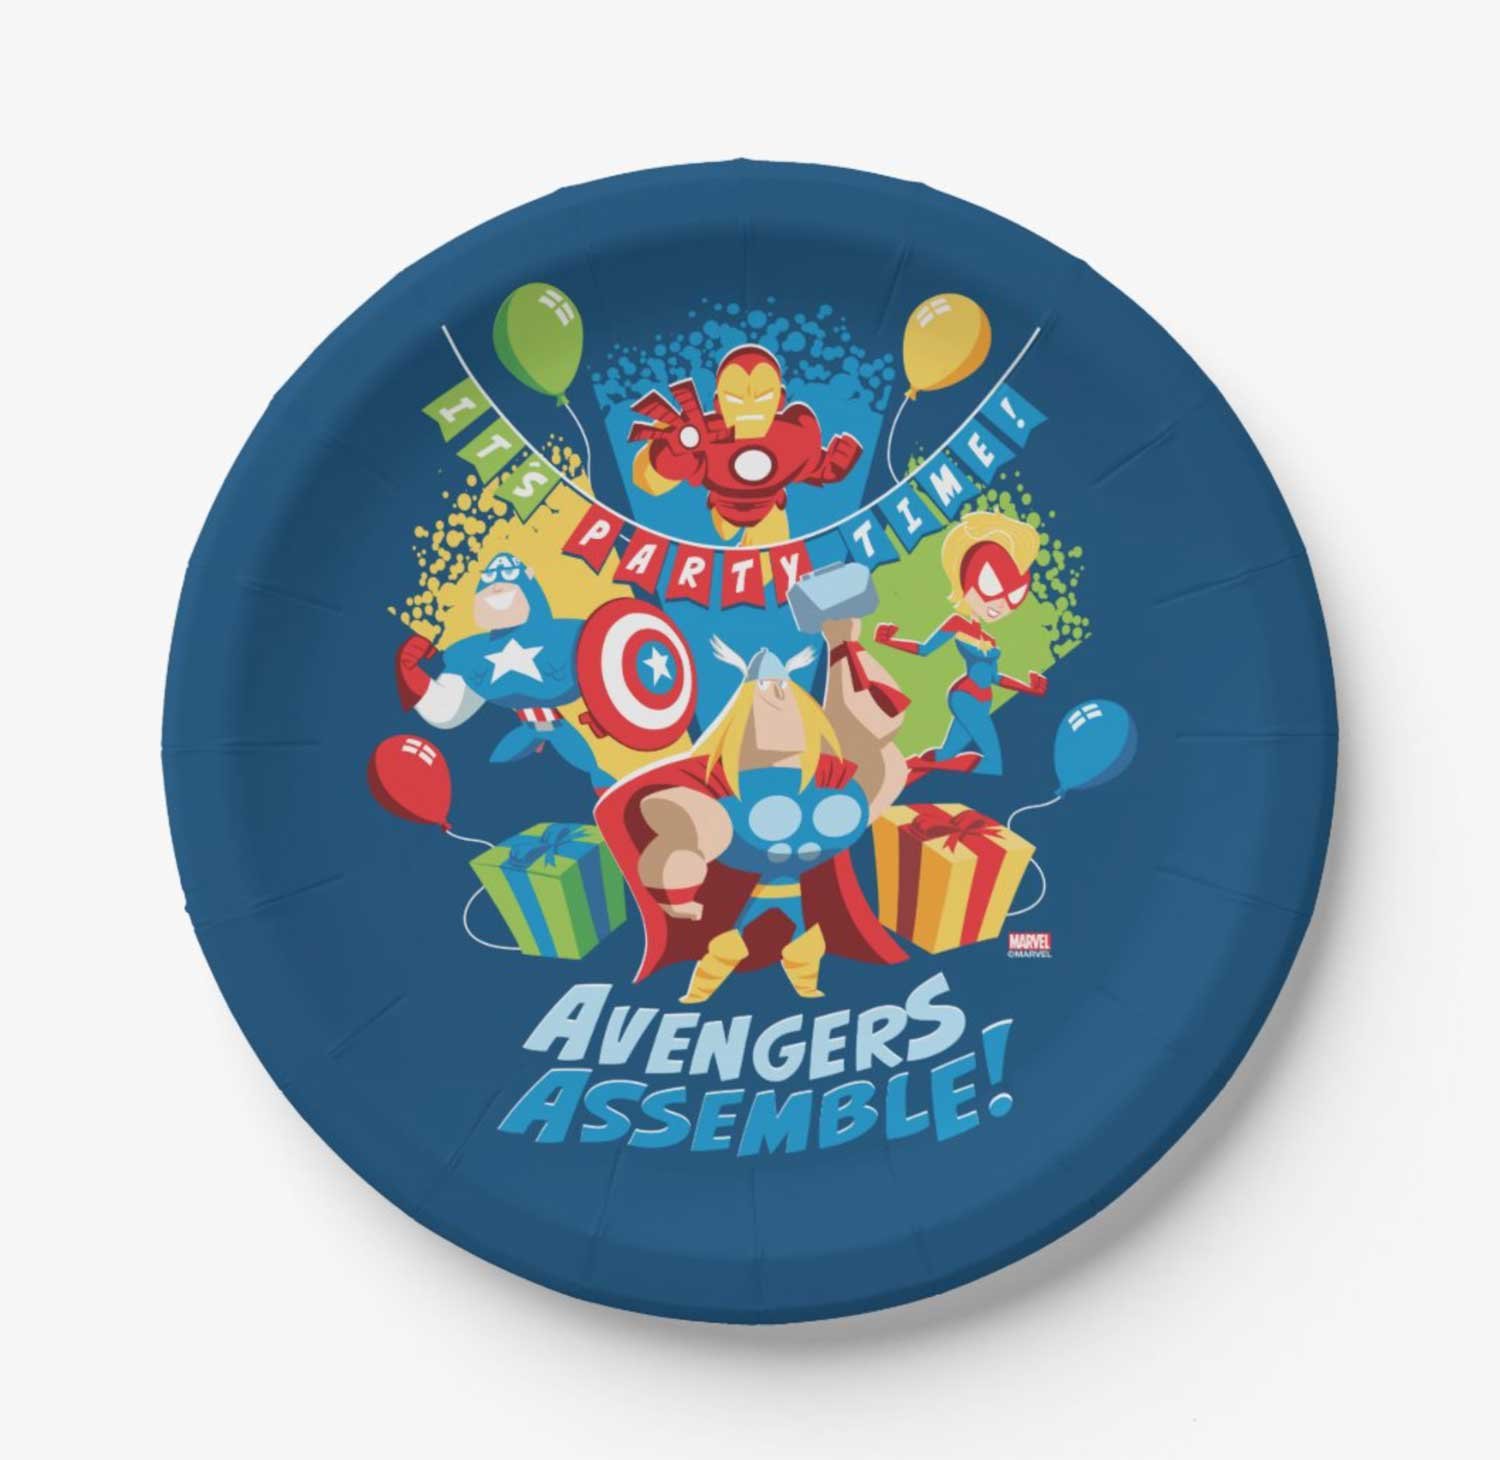 Marvel AVENGERS ASSEMBLE Boys Birthday Party Tableware Decorations Supplies